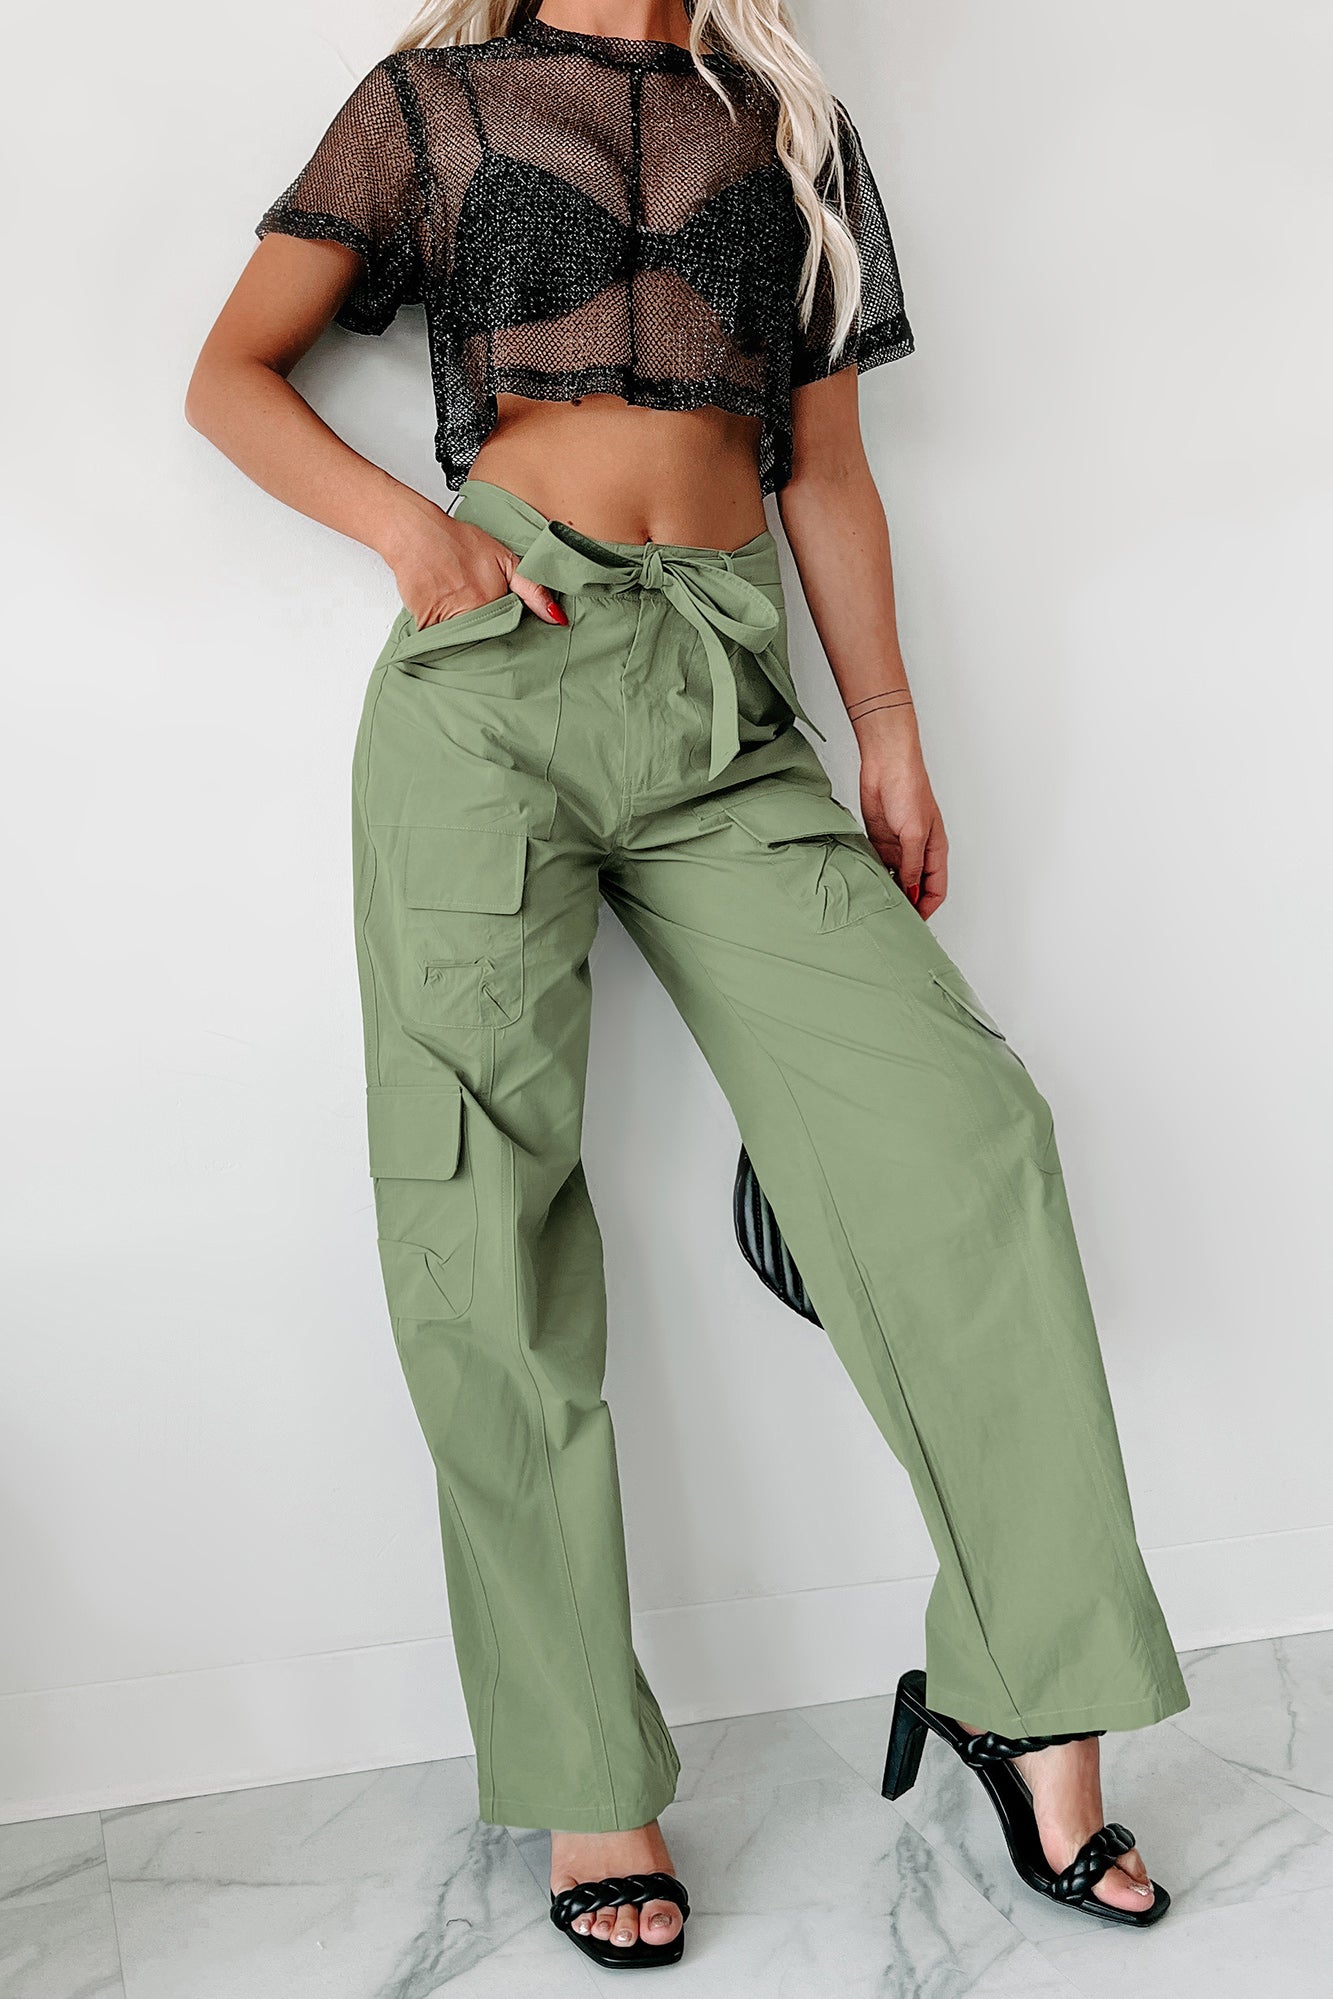 me Women's Tailored Cargo Pants - Sage Green - Size 10